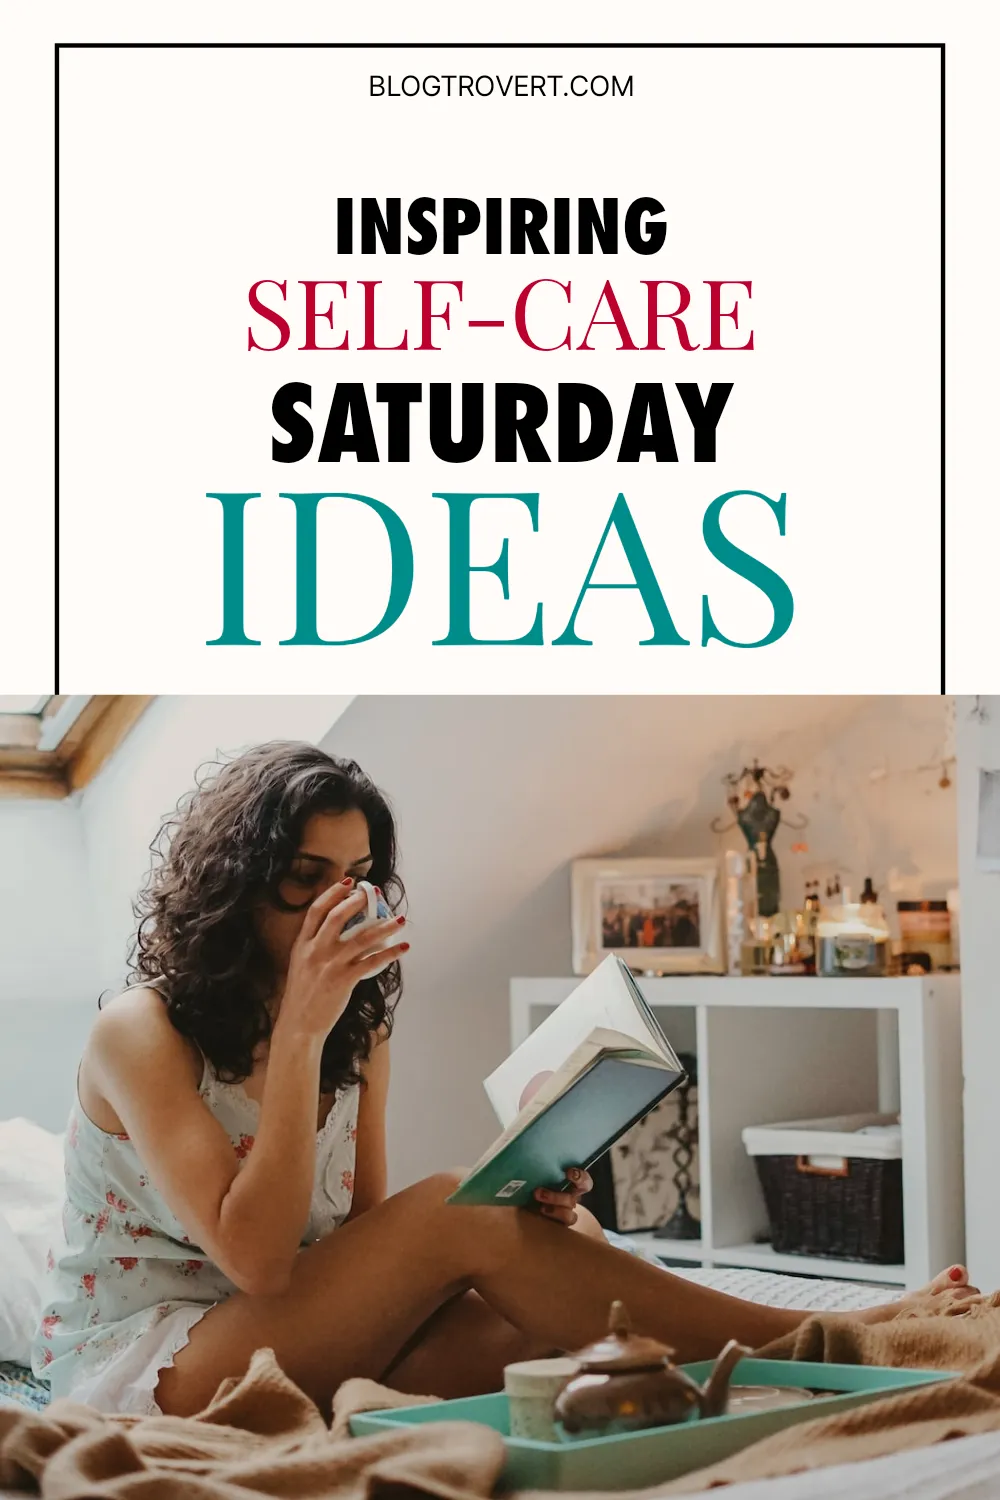 50+ amazing self-care Saturday ideas to try this weekend 4